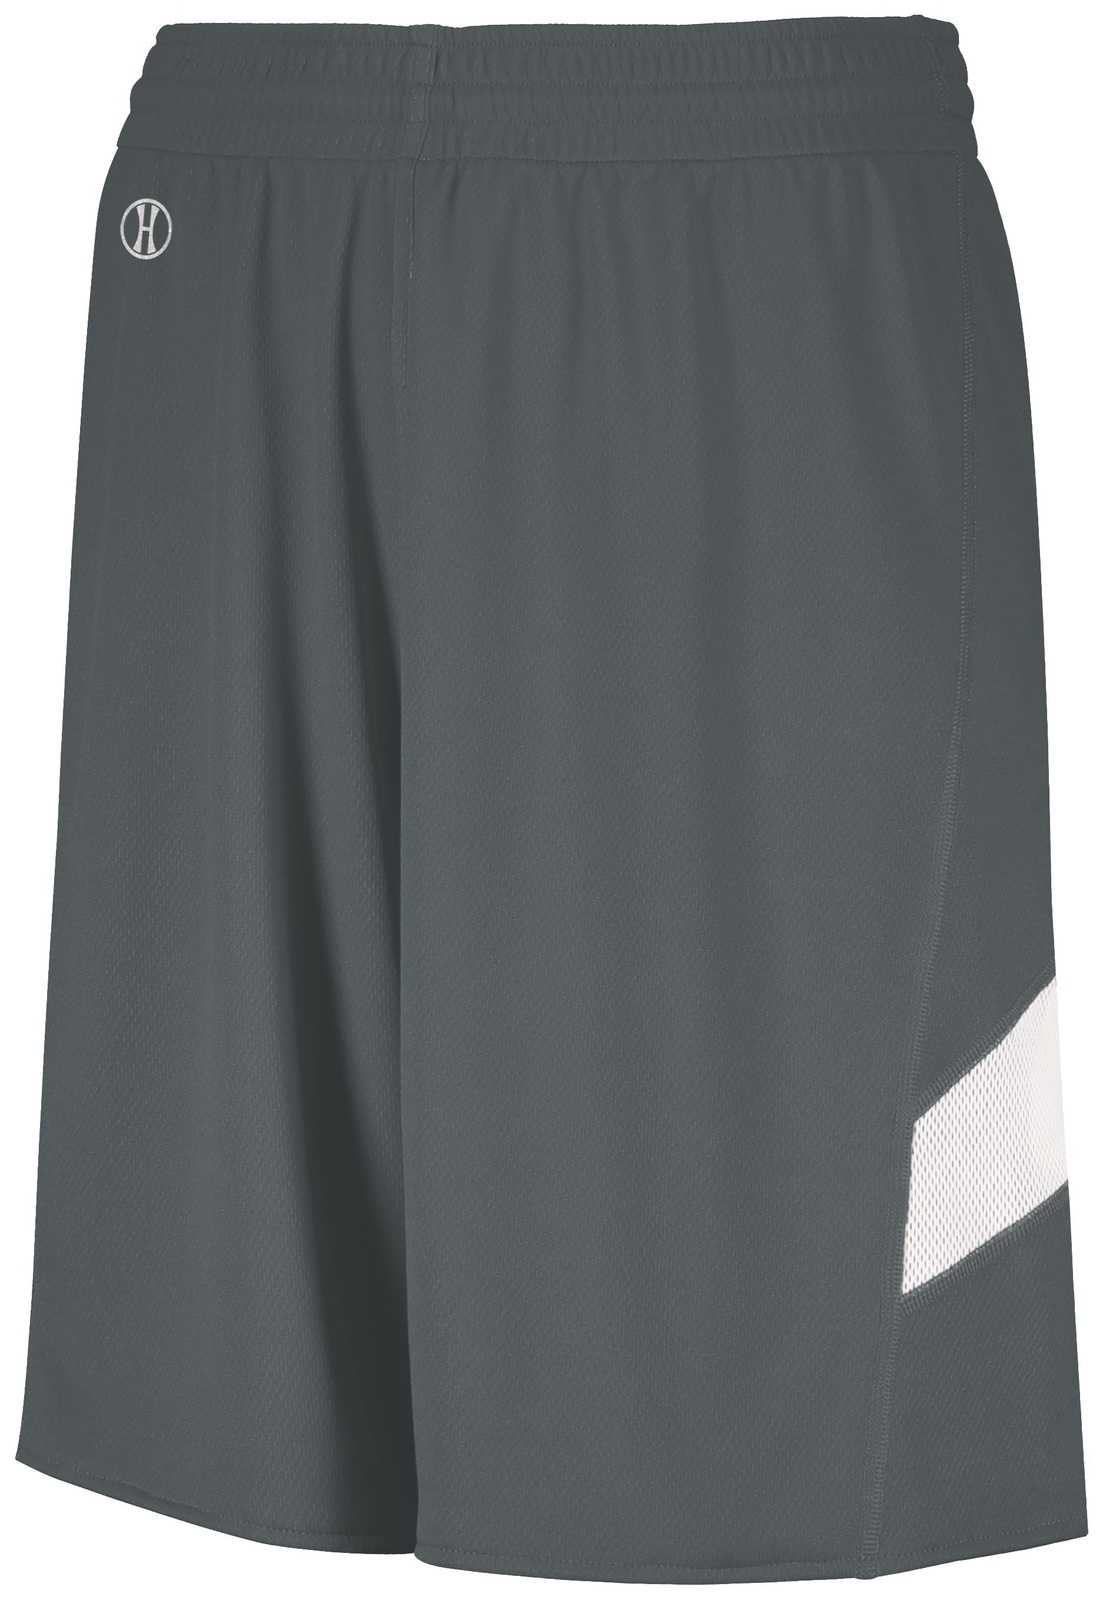 Holloway 224279 Youth Dual-Side Single Ply Basketball Shorts - Graphite White - HIT a Double